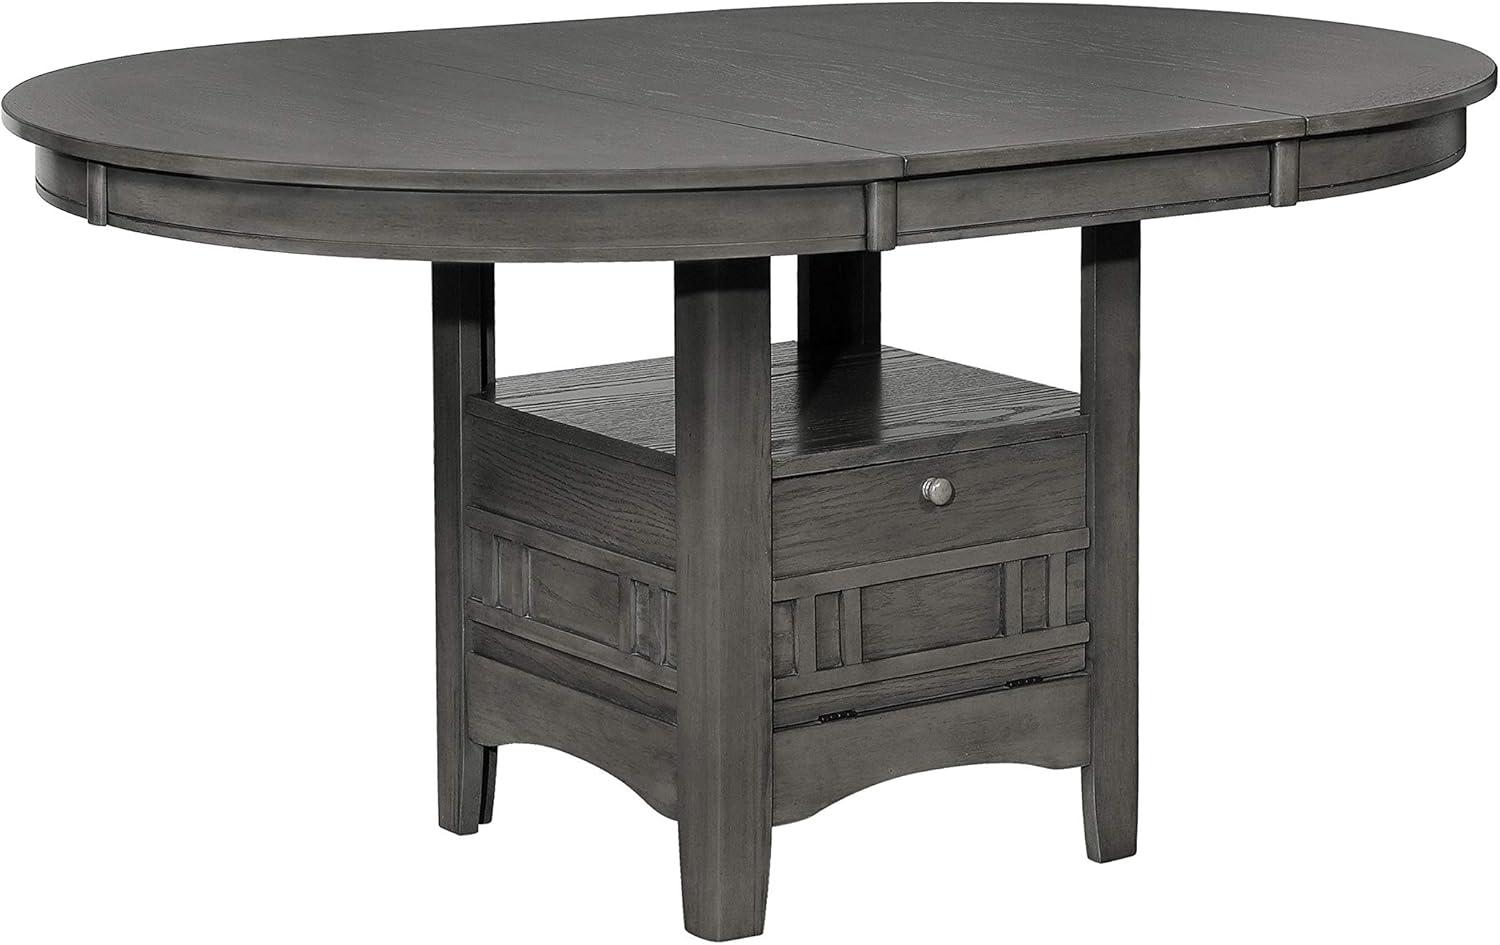 Transitional Medium Grey Extendable Oval Dining Table with Storage